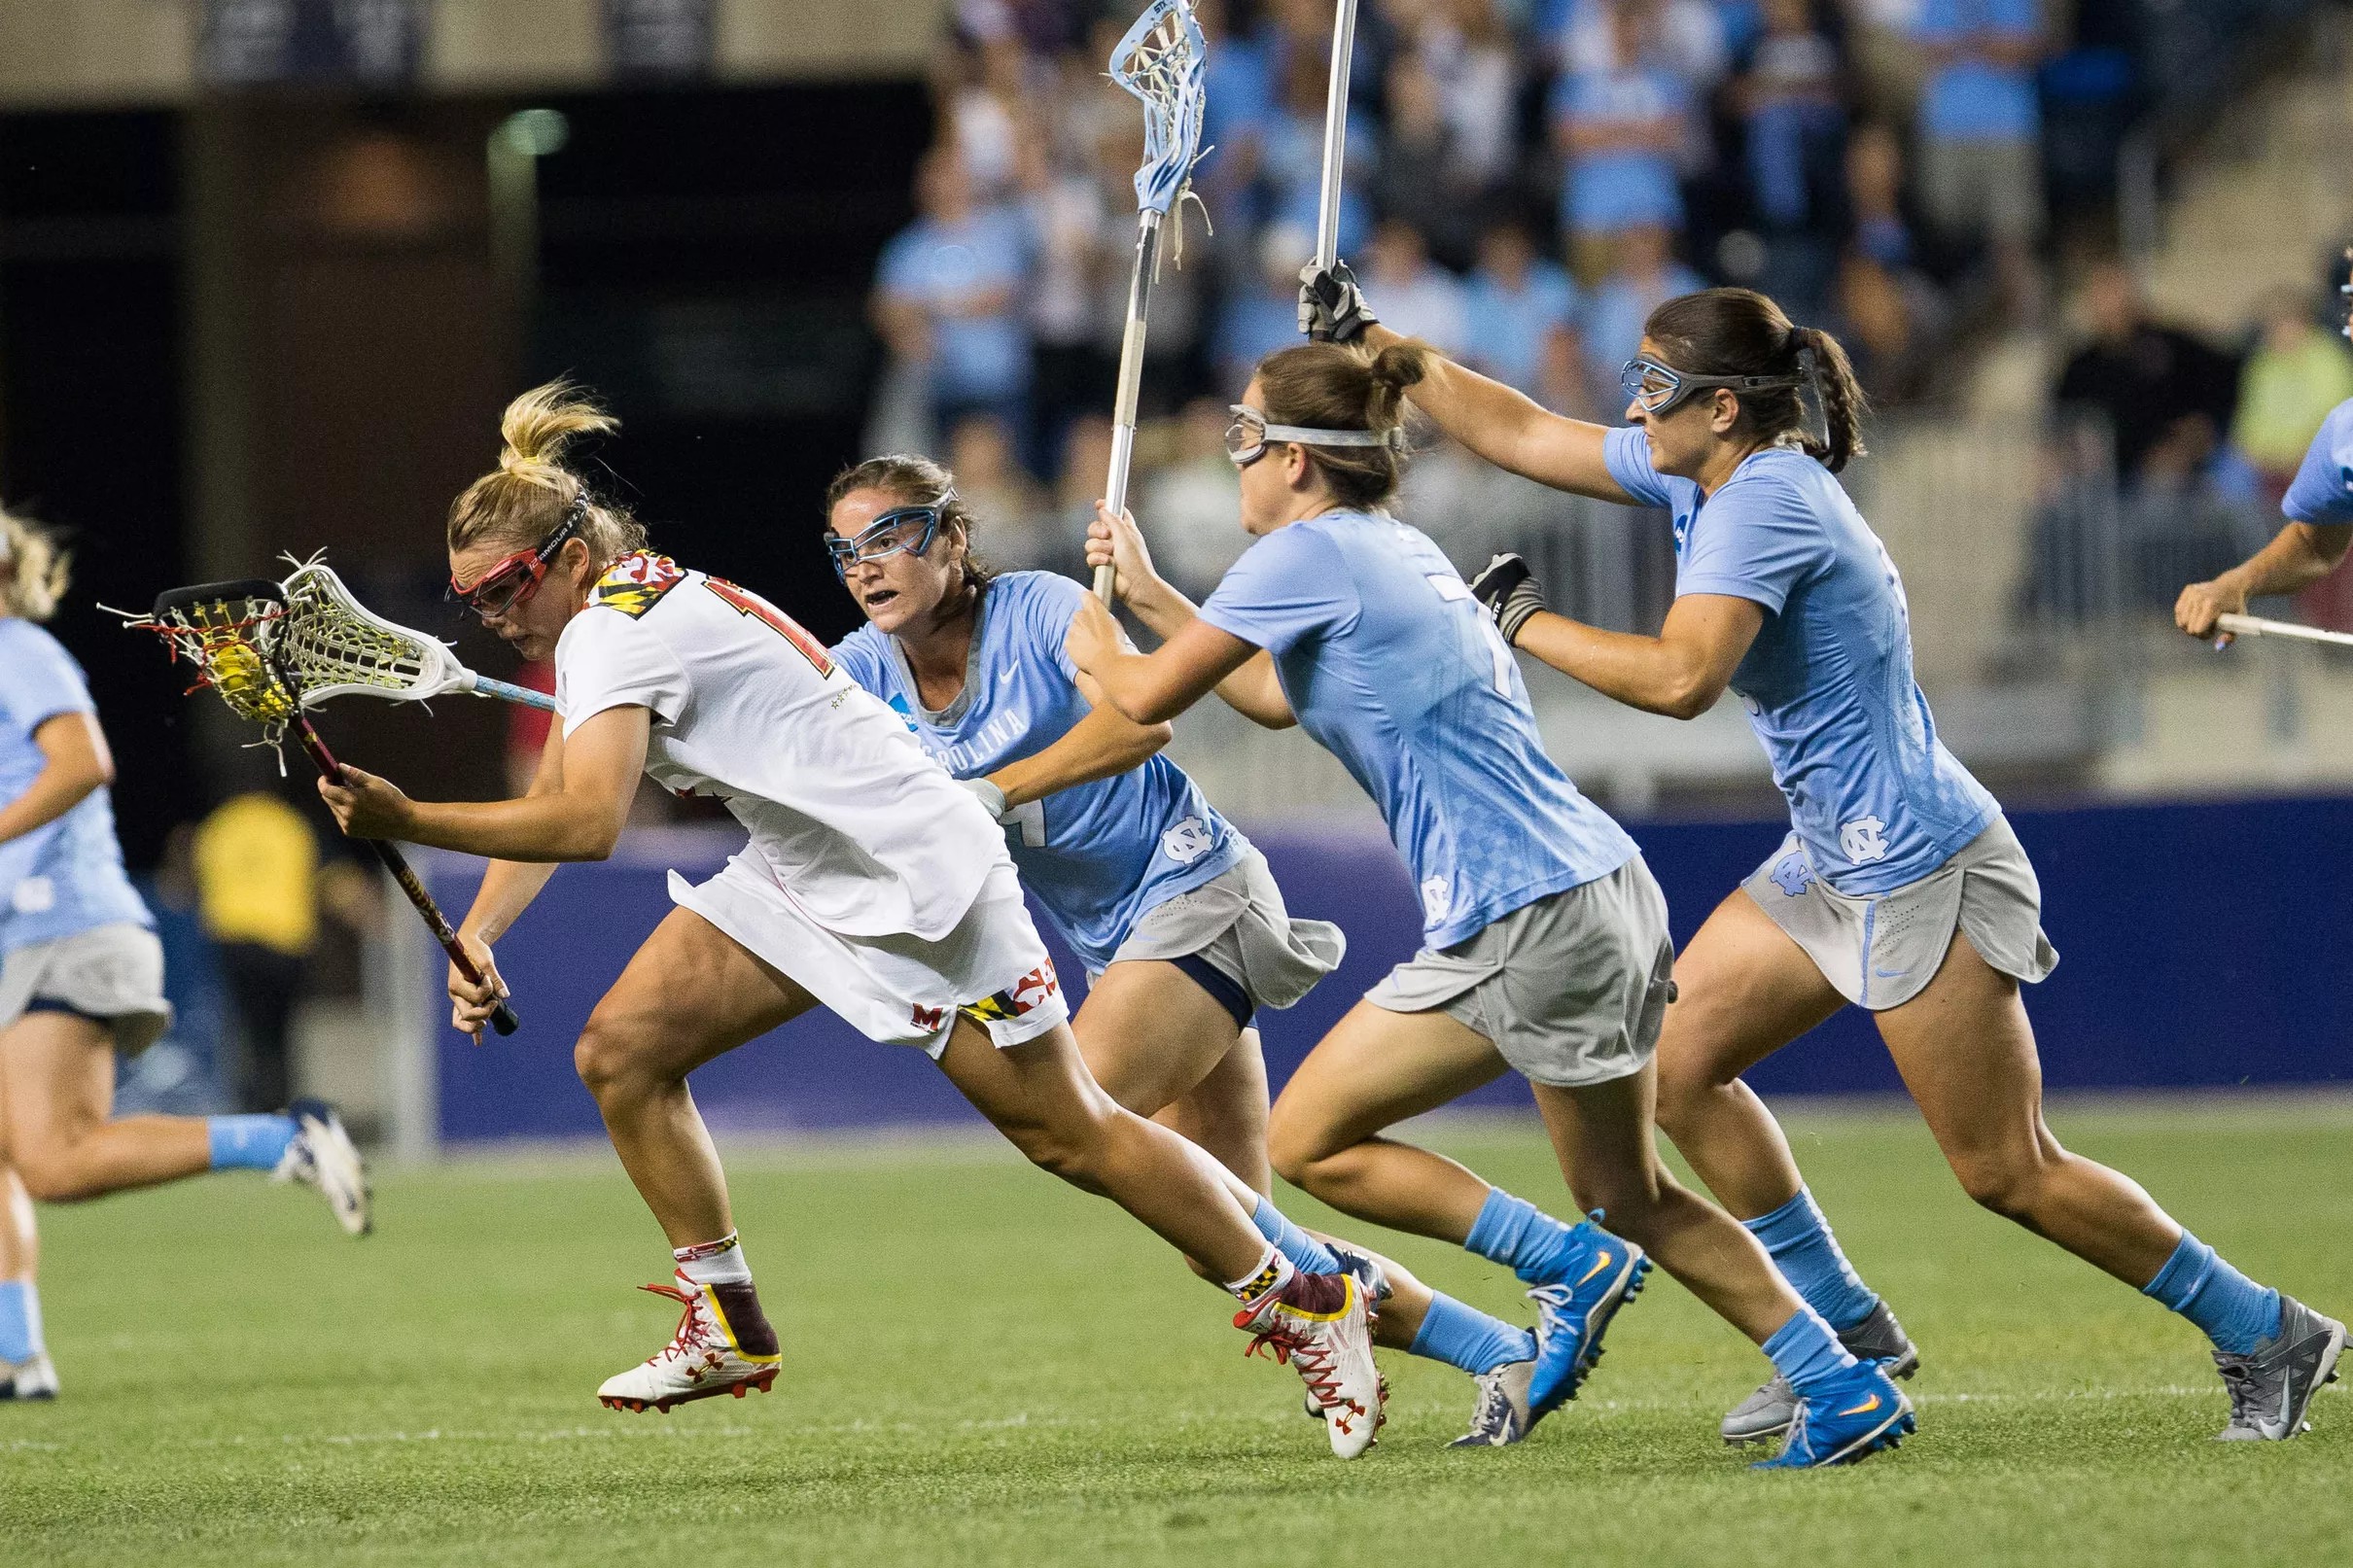 NCAA Women’s Lacrosse Tournament 2017 Maryland cruises past High Point